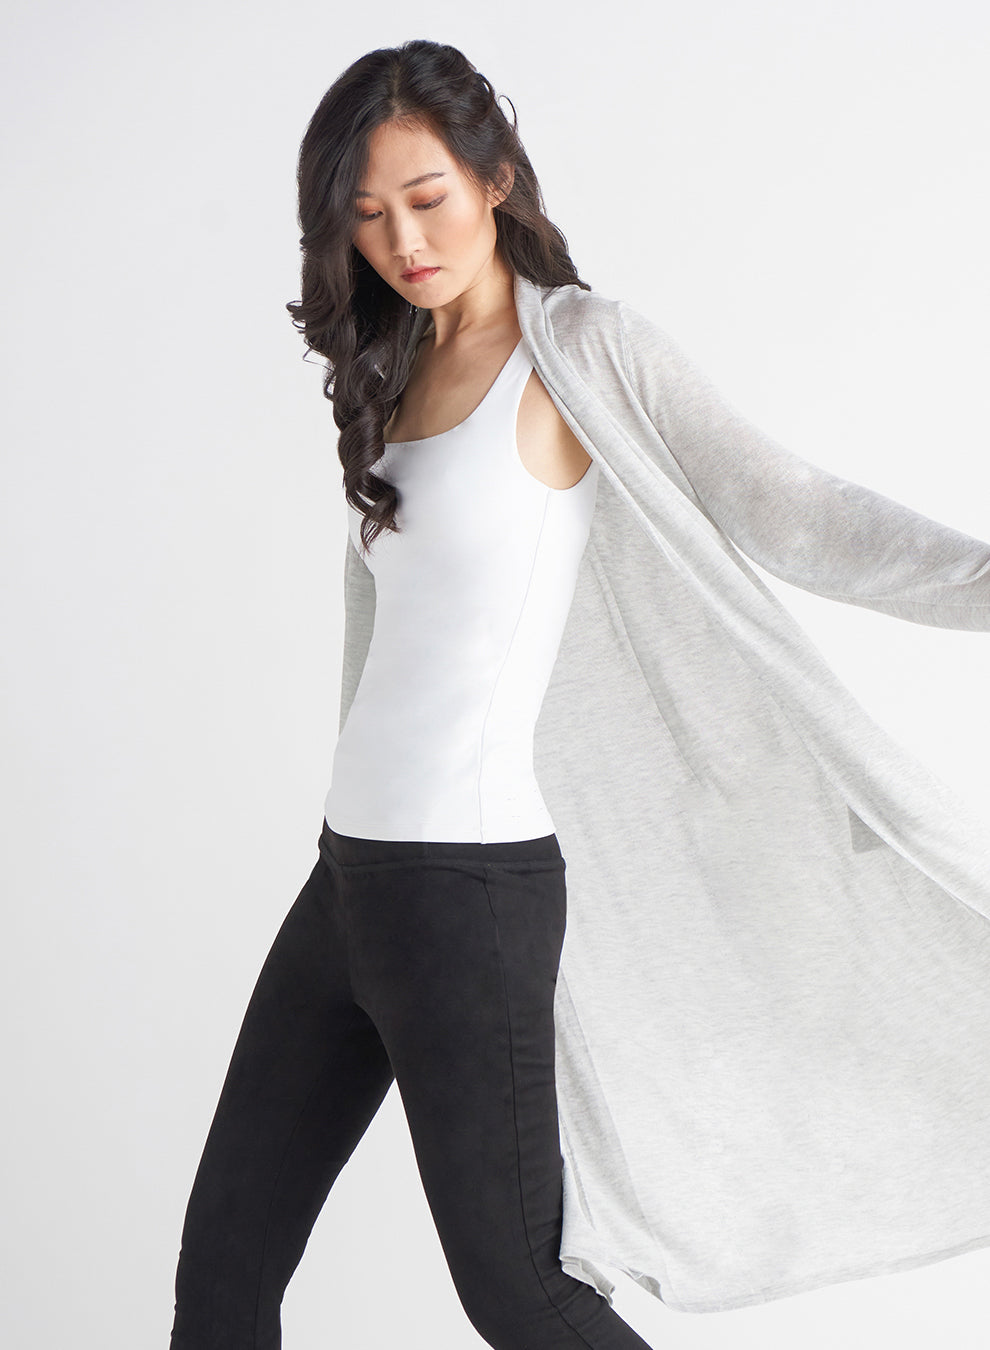 Robe On The Go S. Cardigan-Cardigans-Vixen Collection, Day Spa and Women's Boutique Located in Seattle, Washington